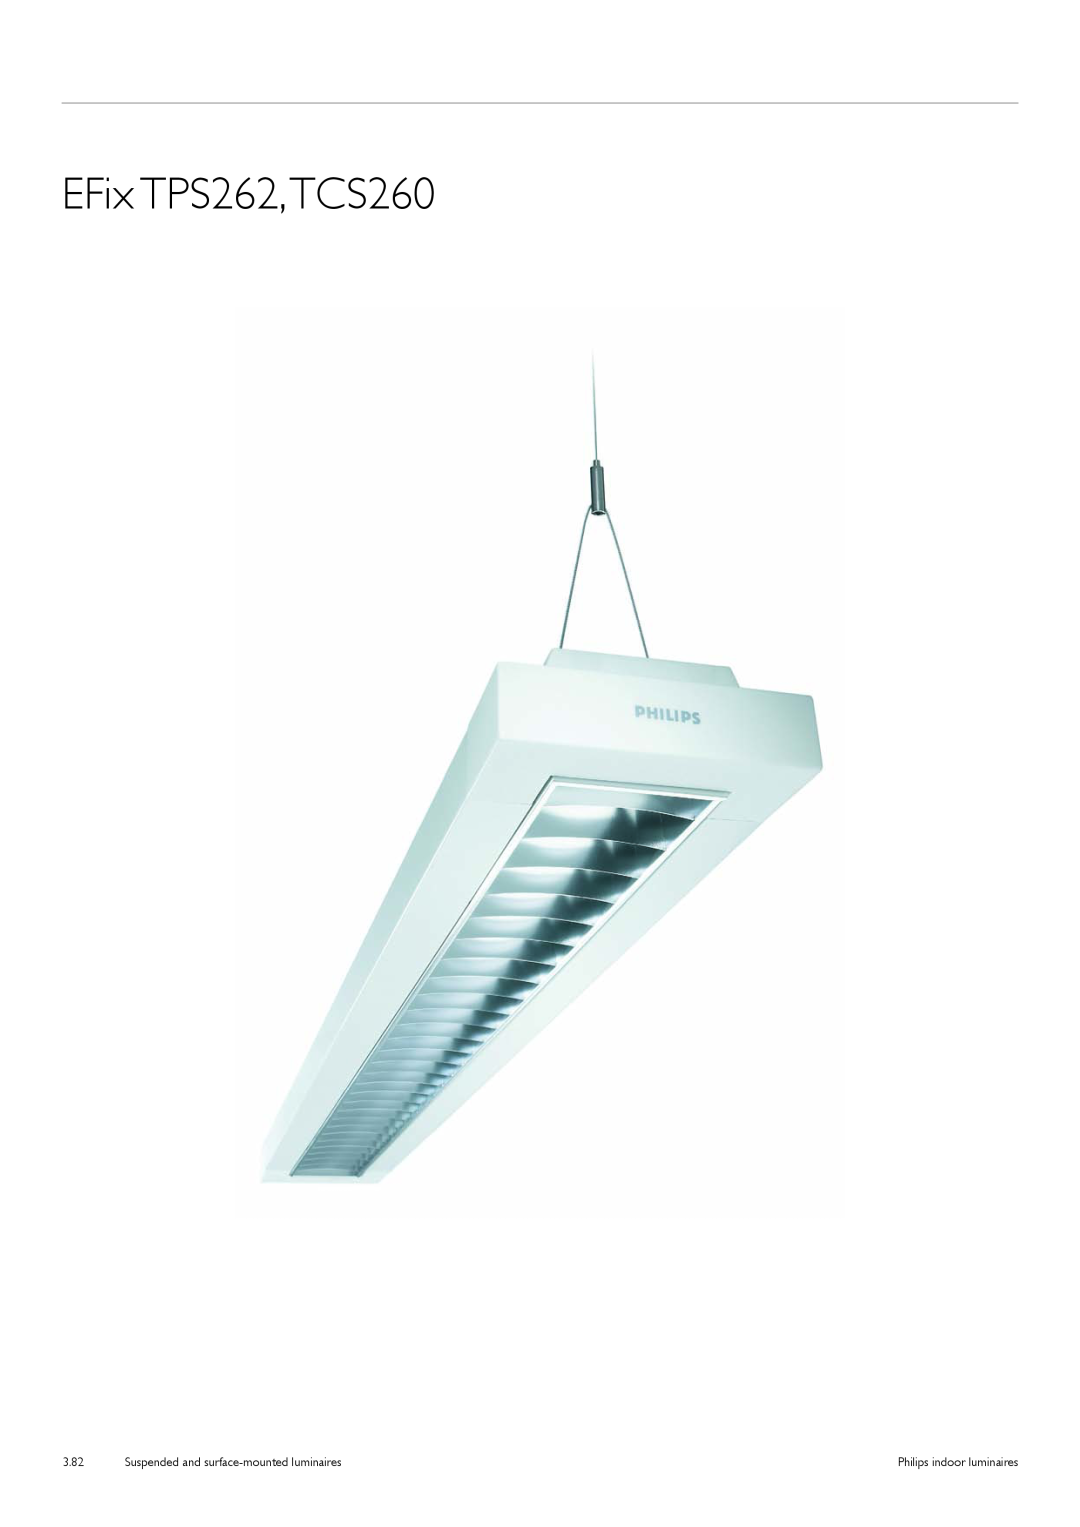 Philips TCS125 manual EFix TPS262,TCS260, Suspended and surface-mountedluminaires, 3.82, Philips indoor luminaires 